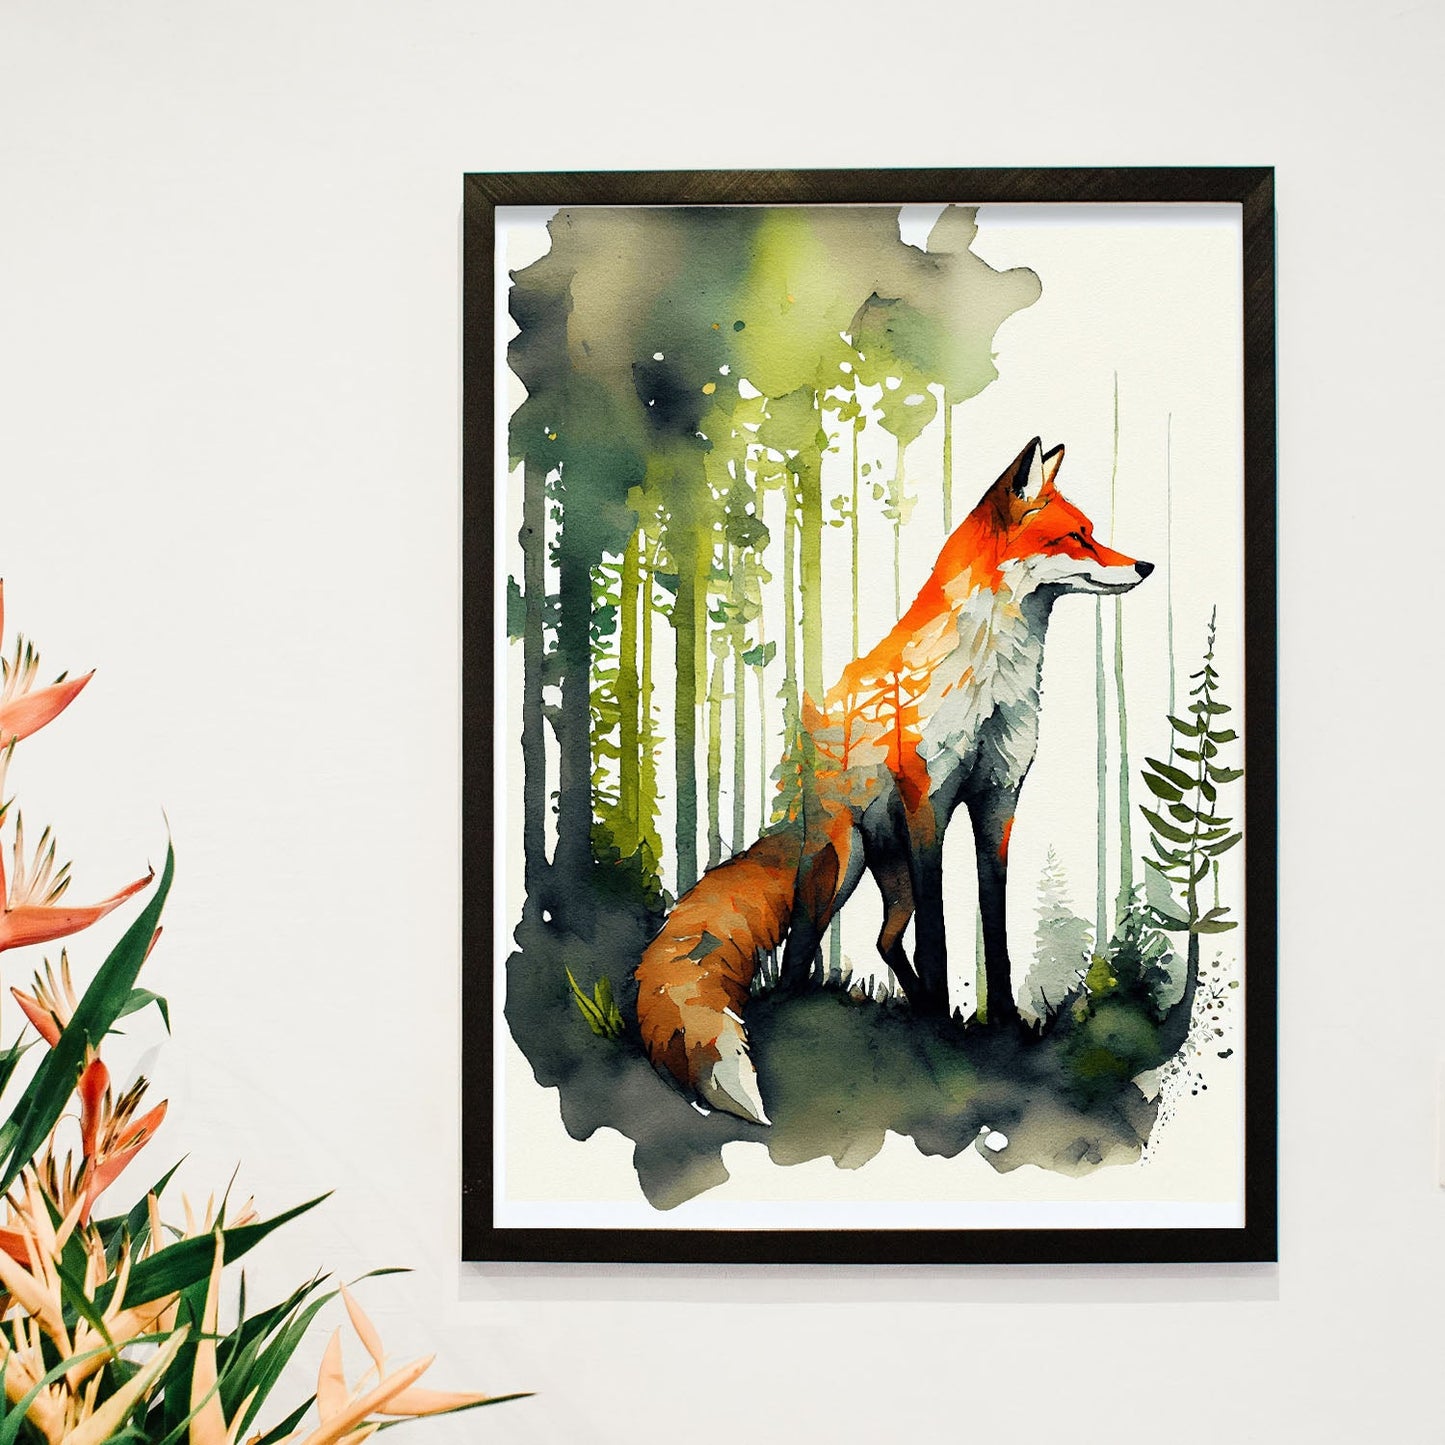 Nacnic Watercolor of Fox in the forest_1. Aesthetic Wall Art Prints for Bedroom or Living Room Design.